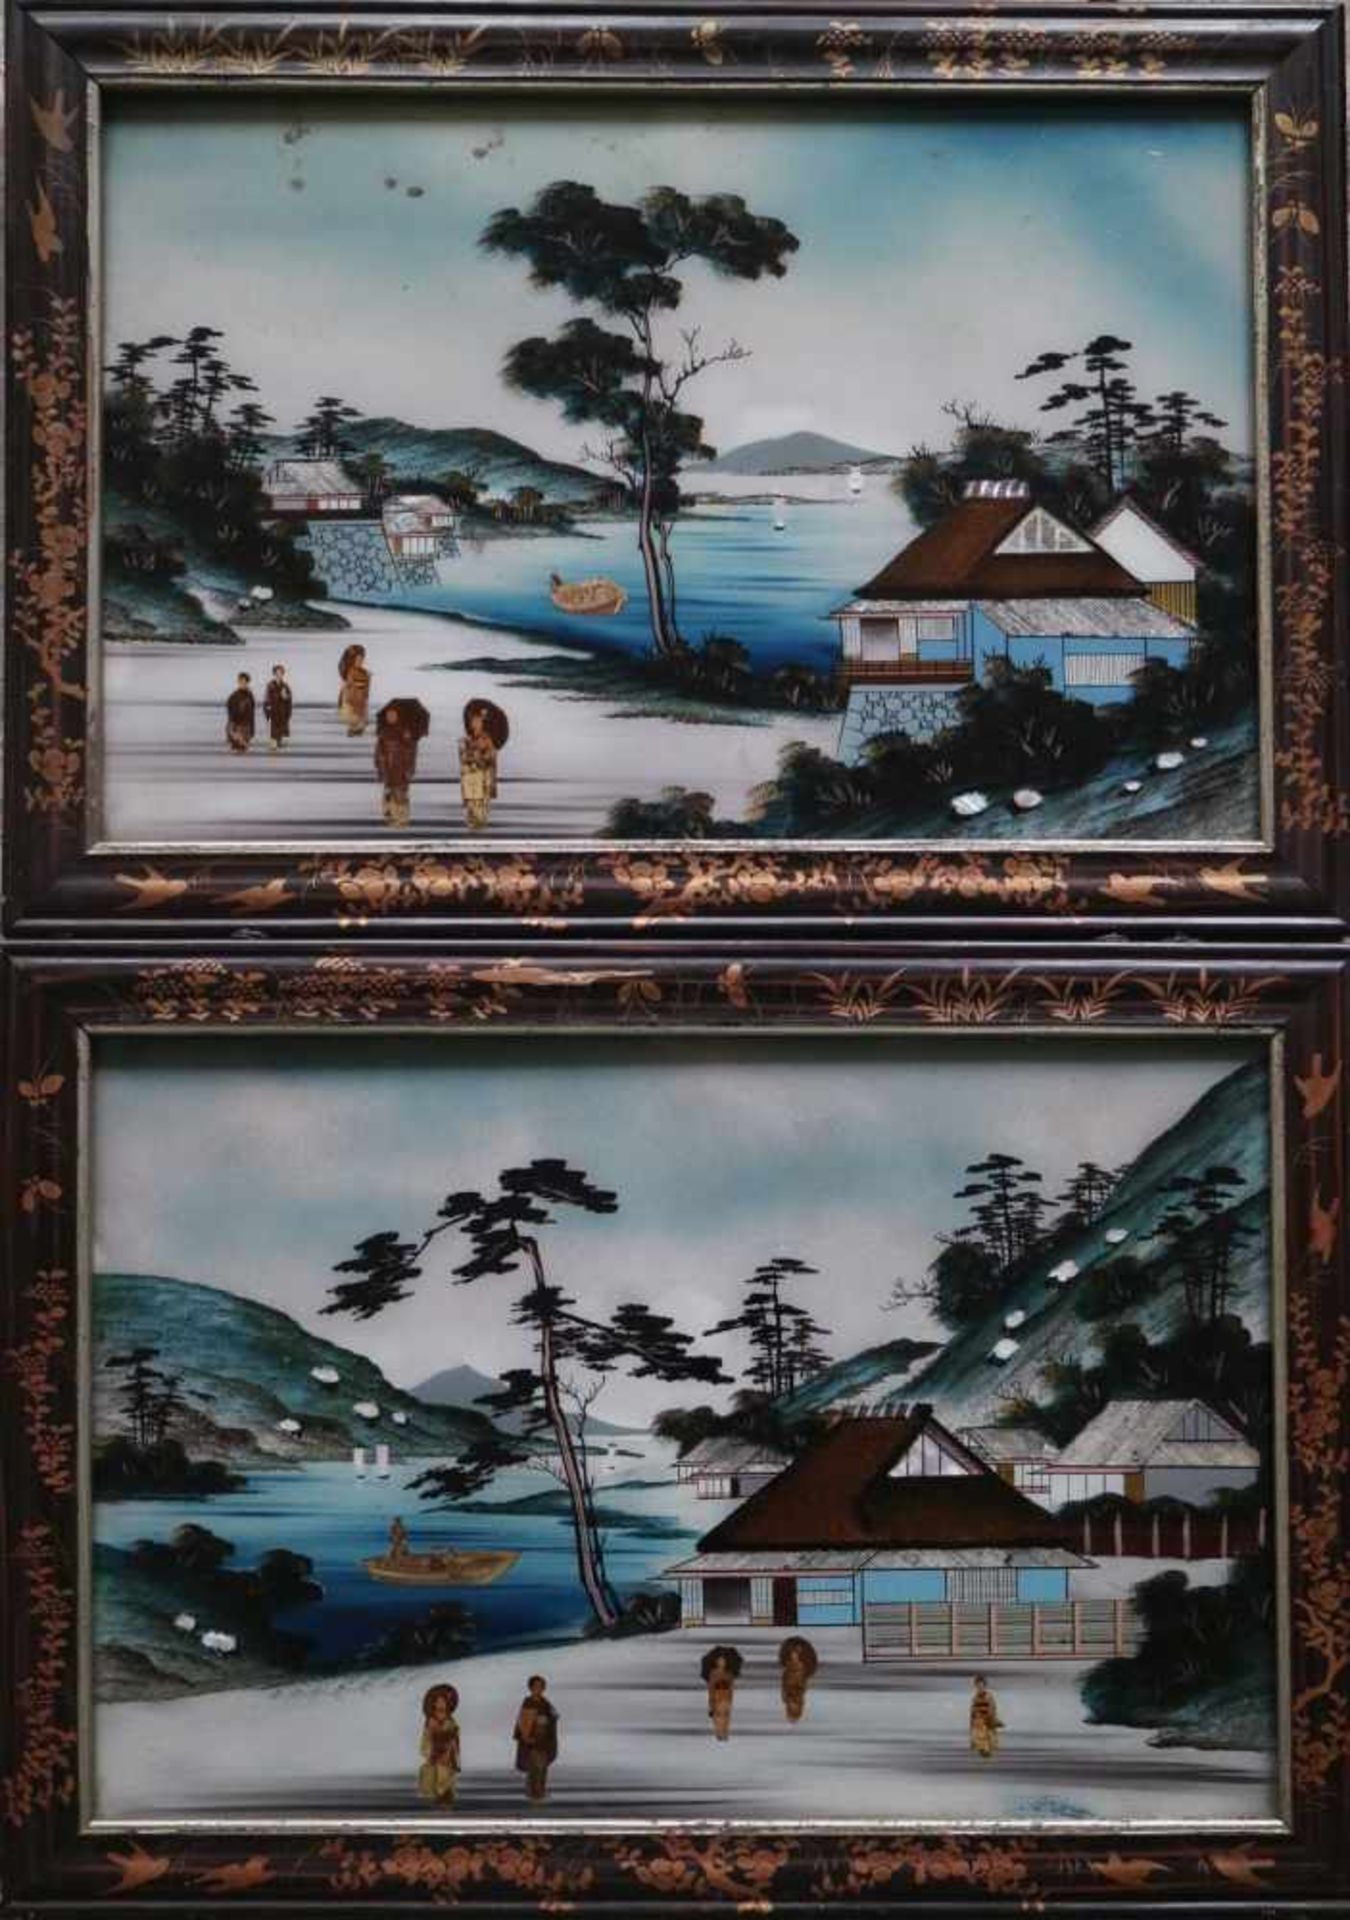 Chinoiseries on glassChinoiseries on glass42 x 63 cm